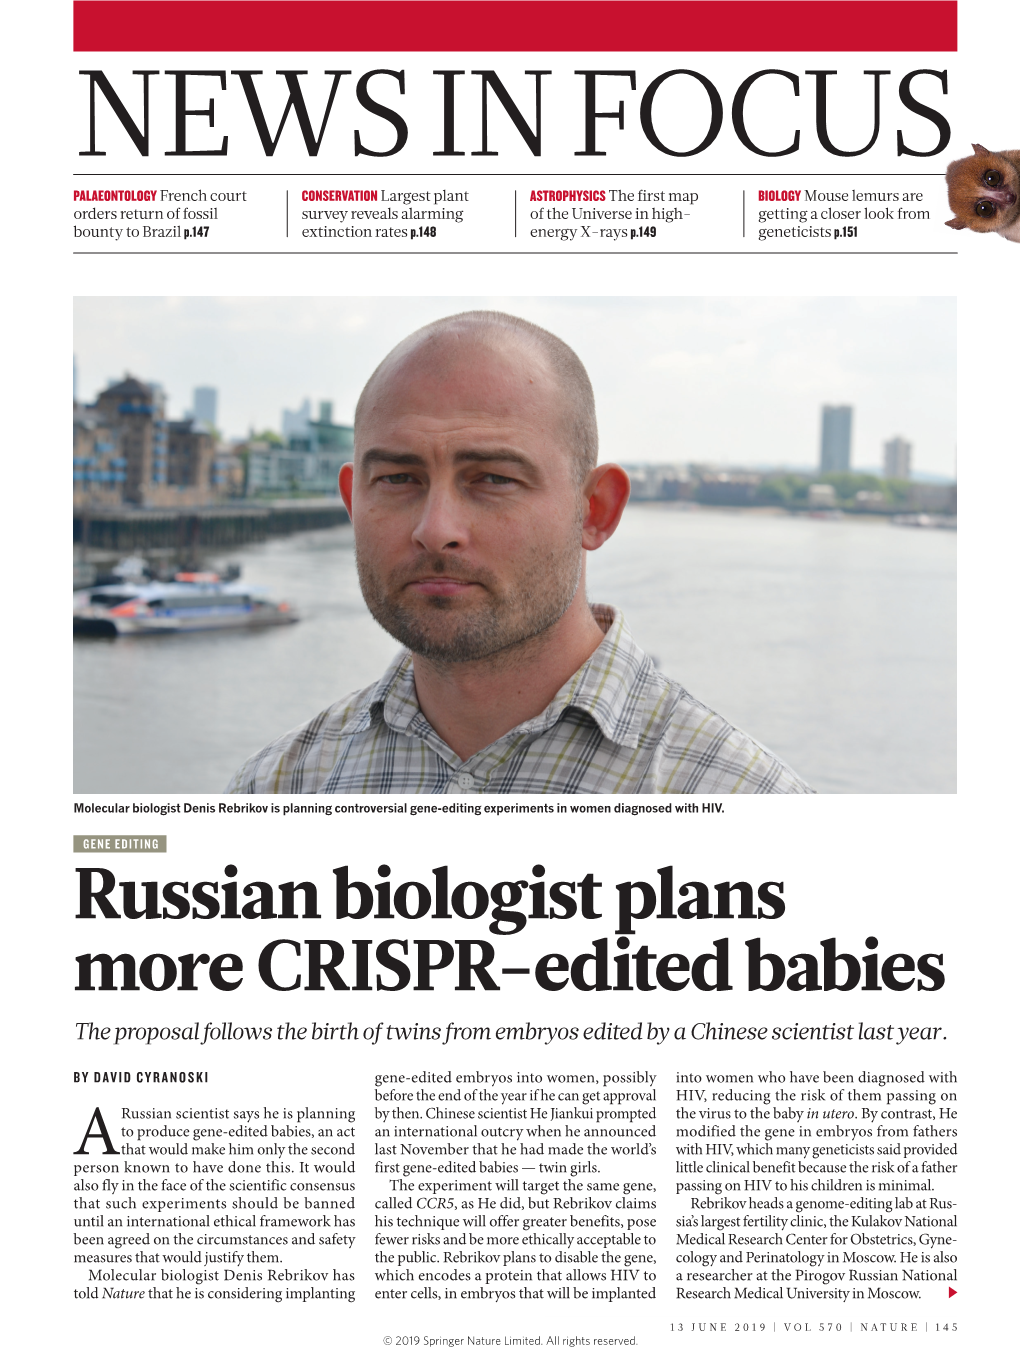 Russian Biologist Plans More CRISPR-Edited Babies the Proposal Follows the Birth of Twins from Embryos Edited by a Chinese Scientist Last Year